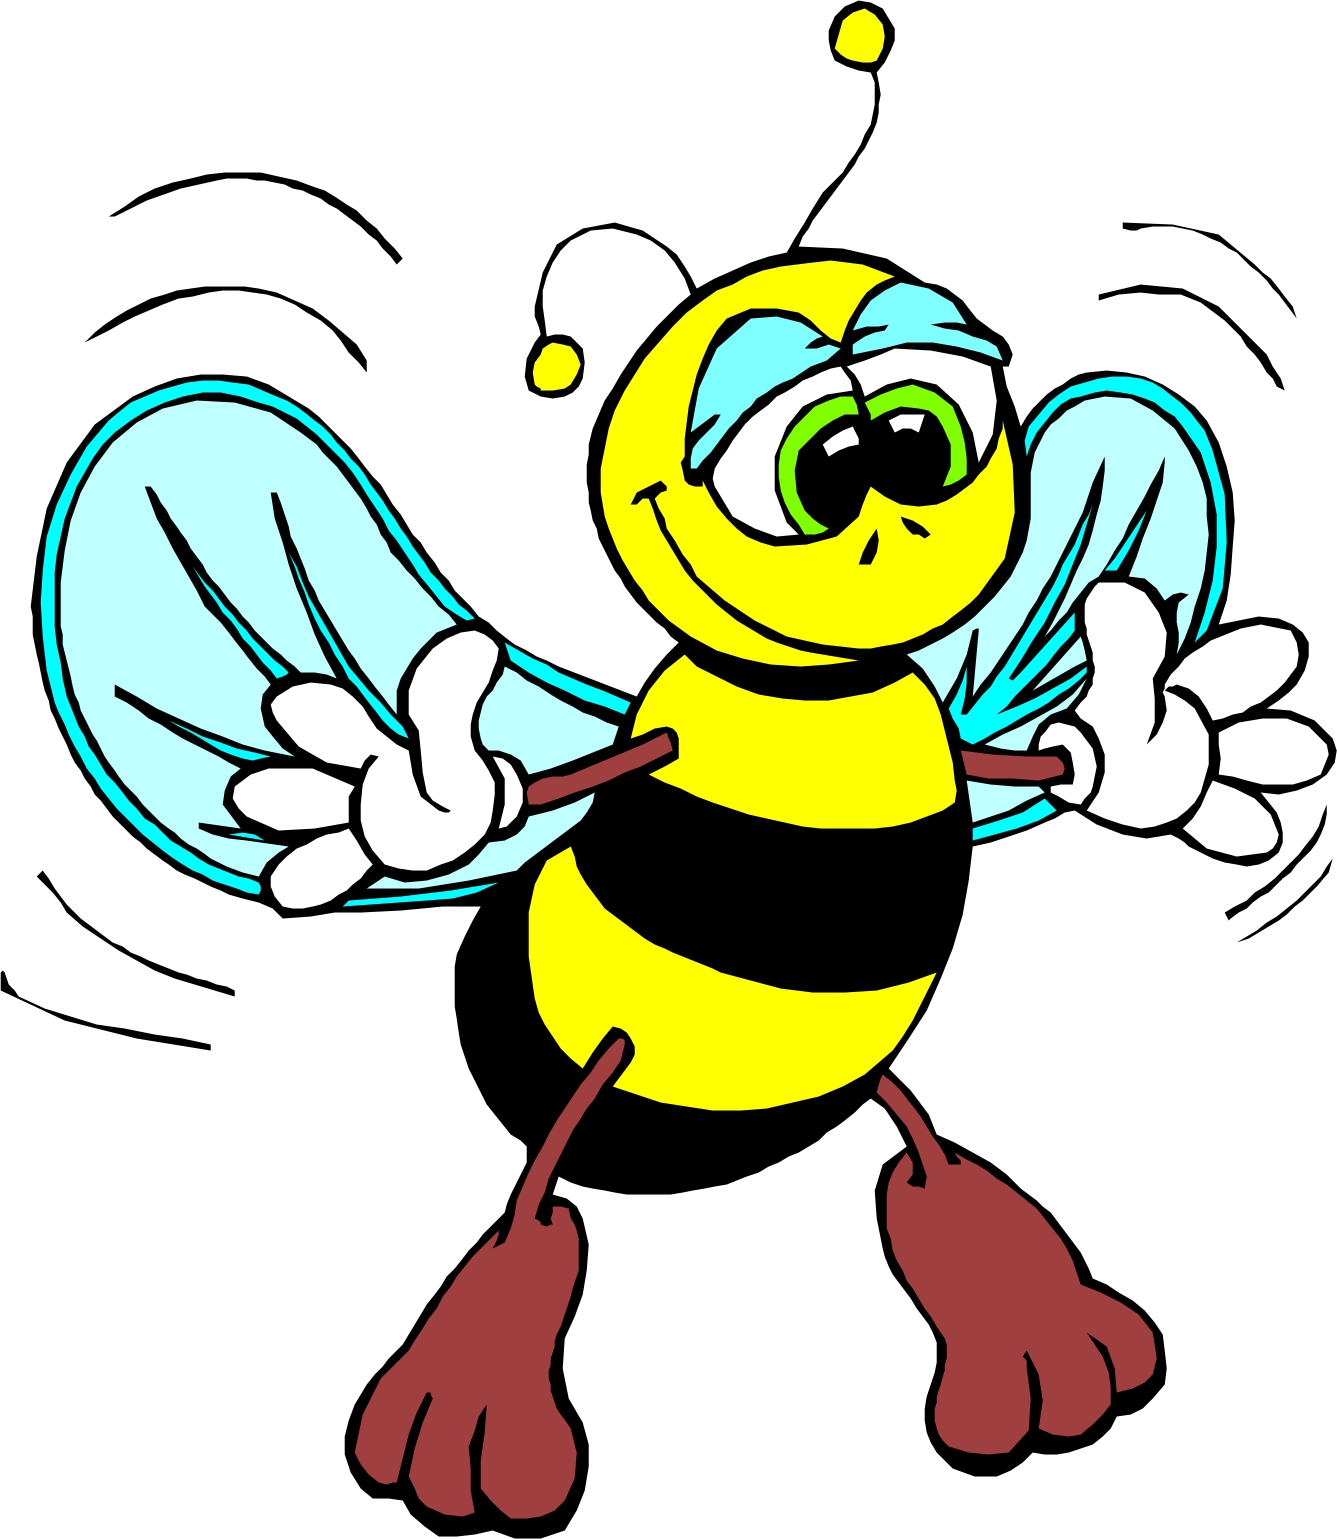 20 Image Of A Animated Bee Free Cliparts That You Can Download To You    